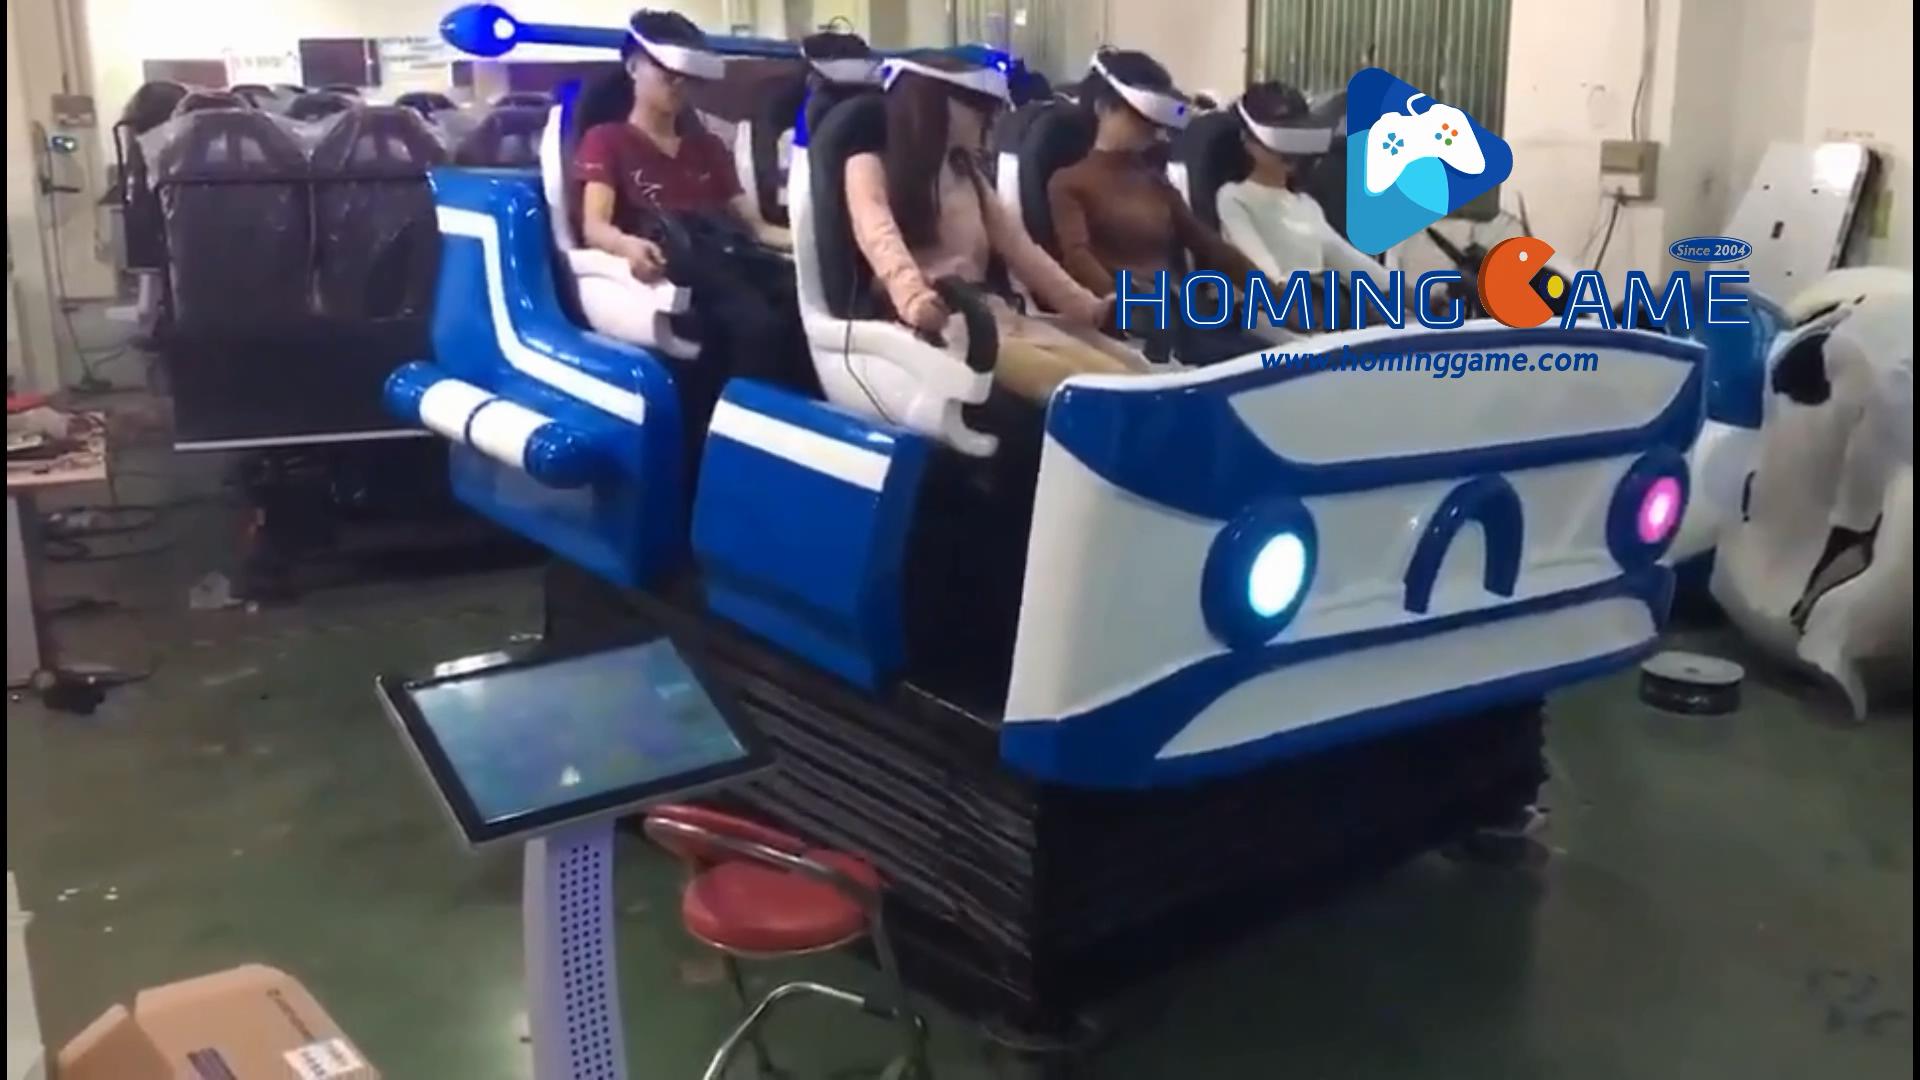 game machine,game machine price,game machine supplier,game machine manufacturer,9d vr reality game machine,9D vr game machine,9D VR egg game machine,9D Vr egg 2 seats game machine,9D VR GAME,9D VR 6 seats cinema,9D VR games,9D VR spaceship reality game machine,arcade game machine,coin operated game machine,indoor game machine,electrical game machine,amusment machine,amusement game equipment,game equipment,games,arcade games,entertainment game machine,hominggame,www.gametube.hk,hominggame 9D VR game machine,HomingGam 9D reality VR game machine,amusement game,amusement  machine